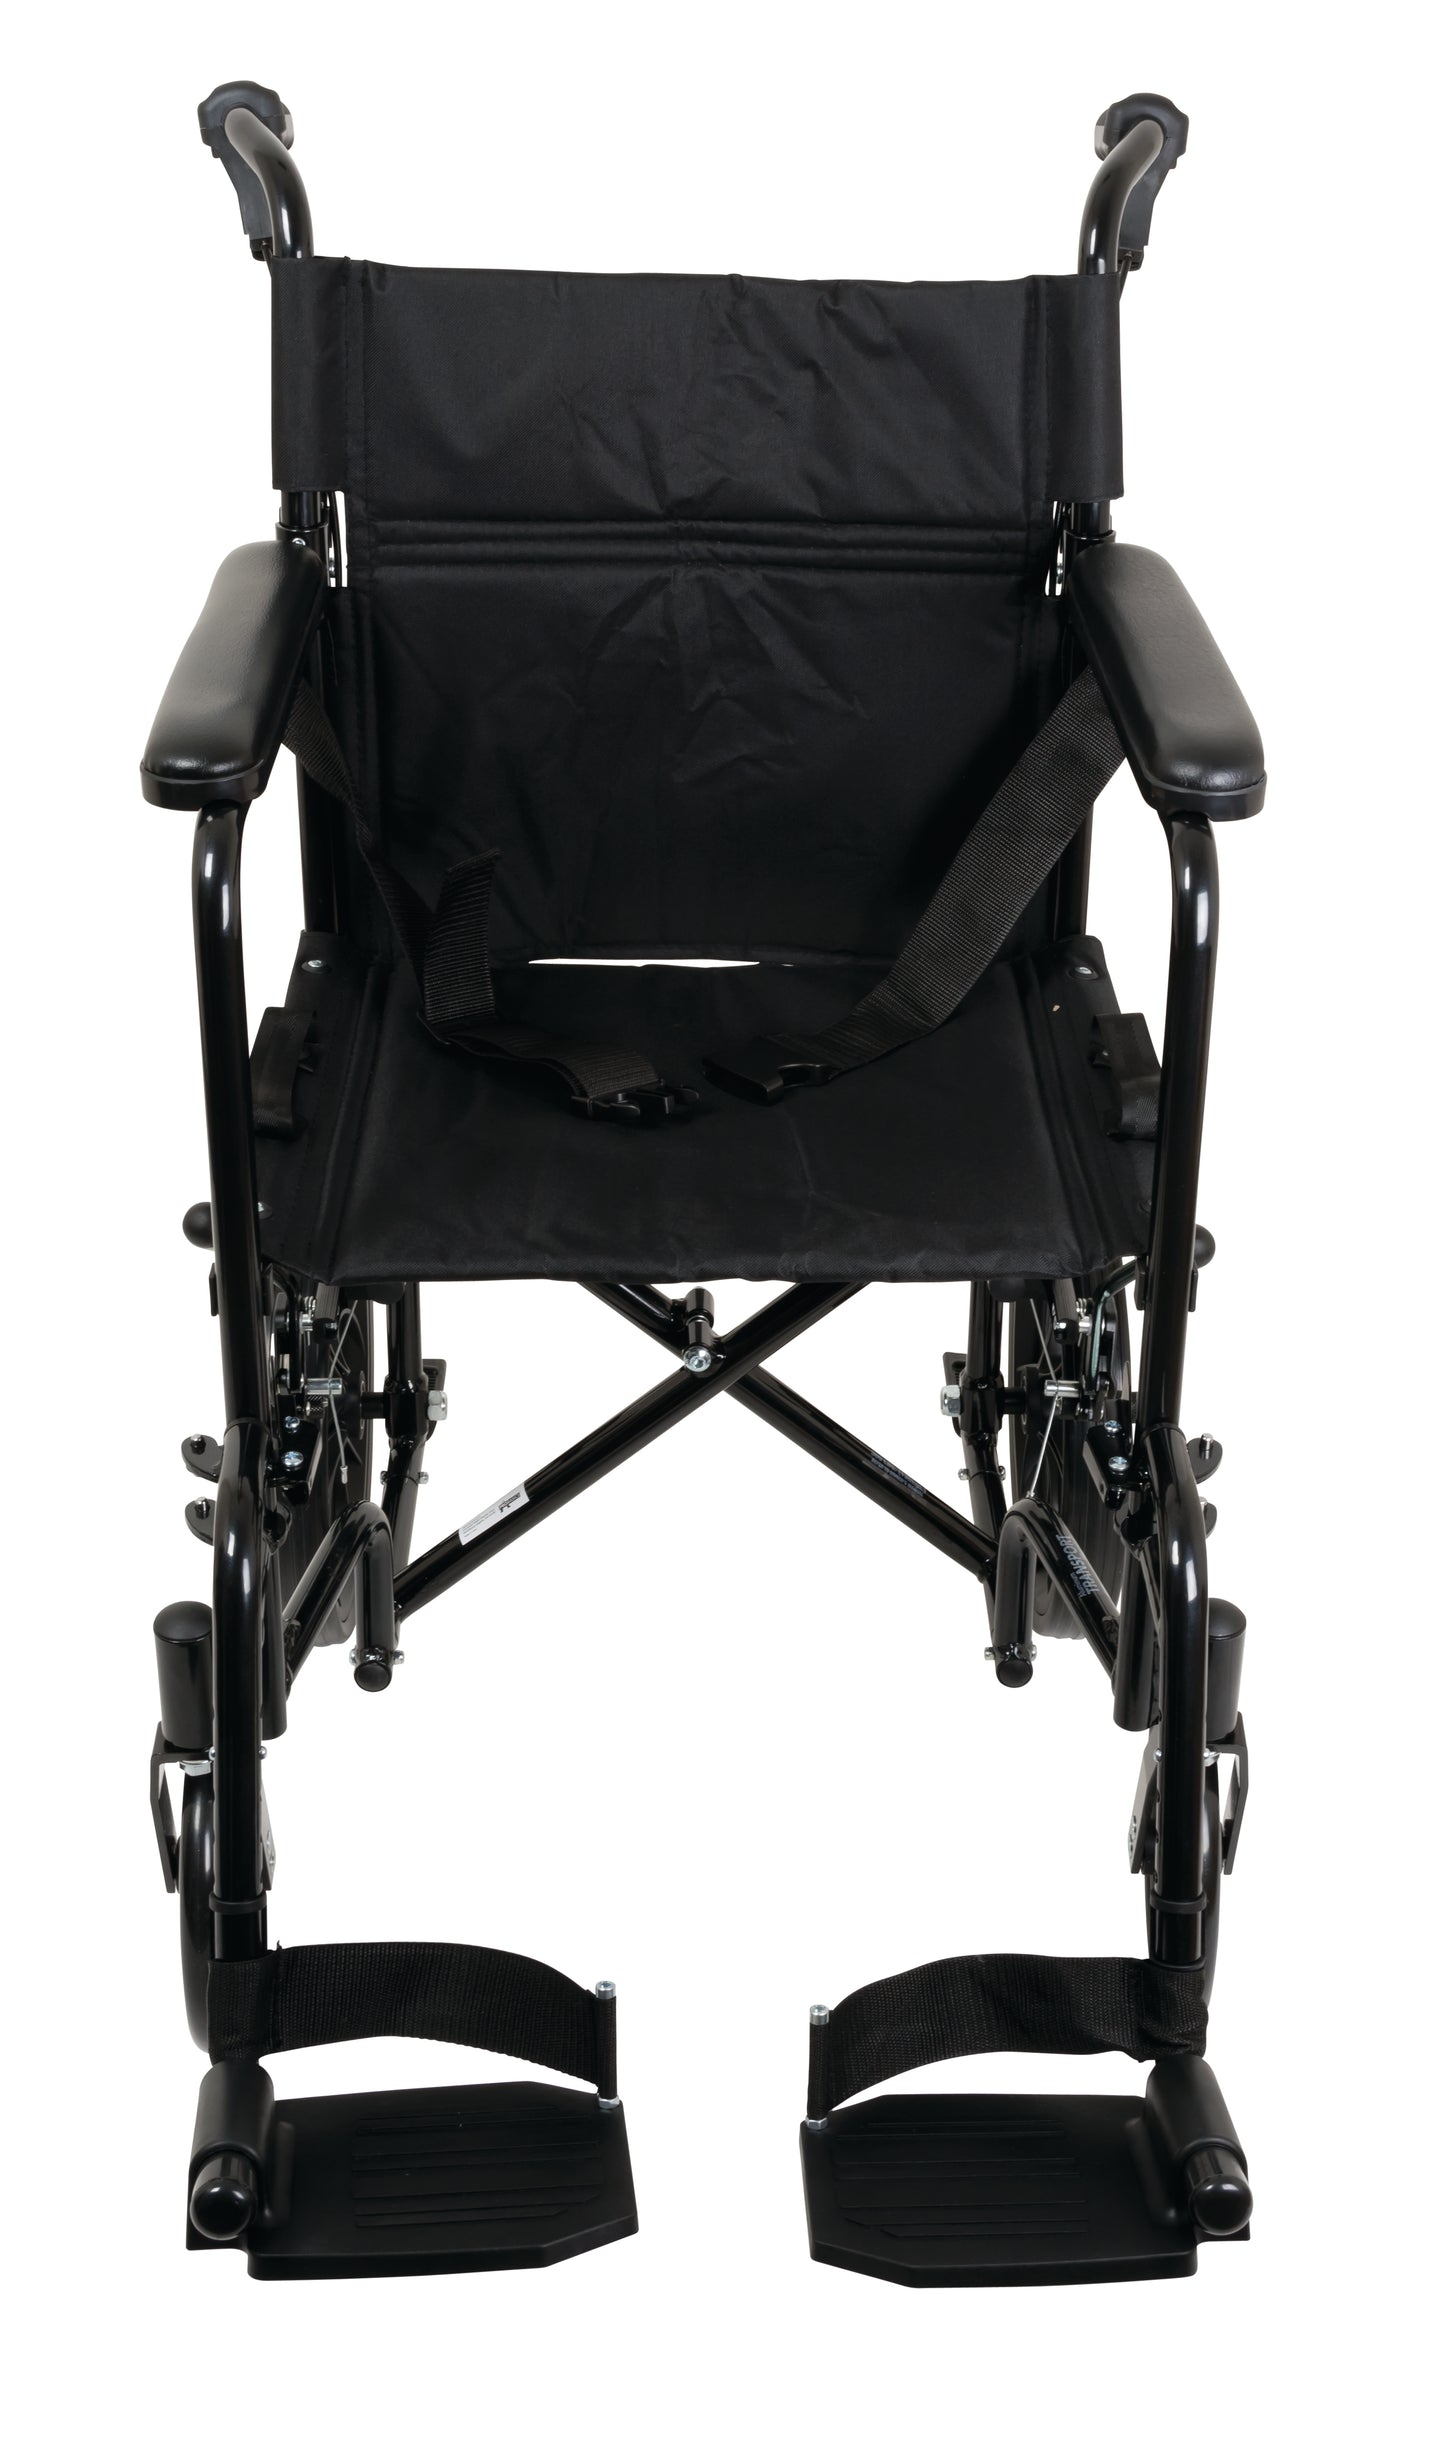 ProBasics Aluminum Transport Chair with 12" Wheels